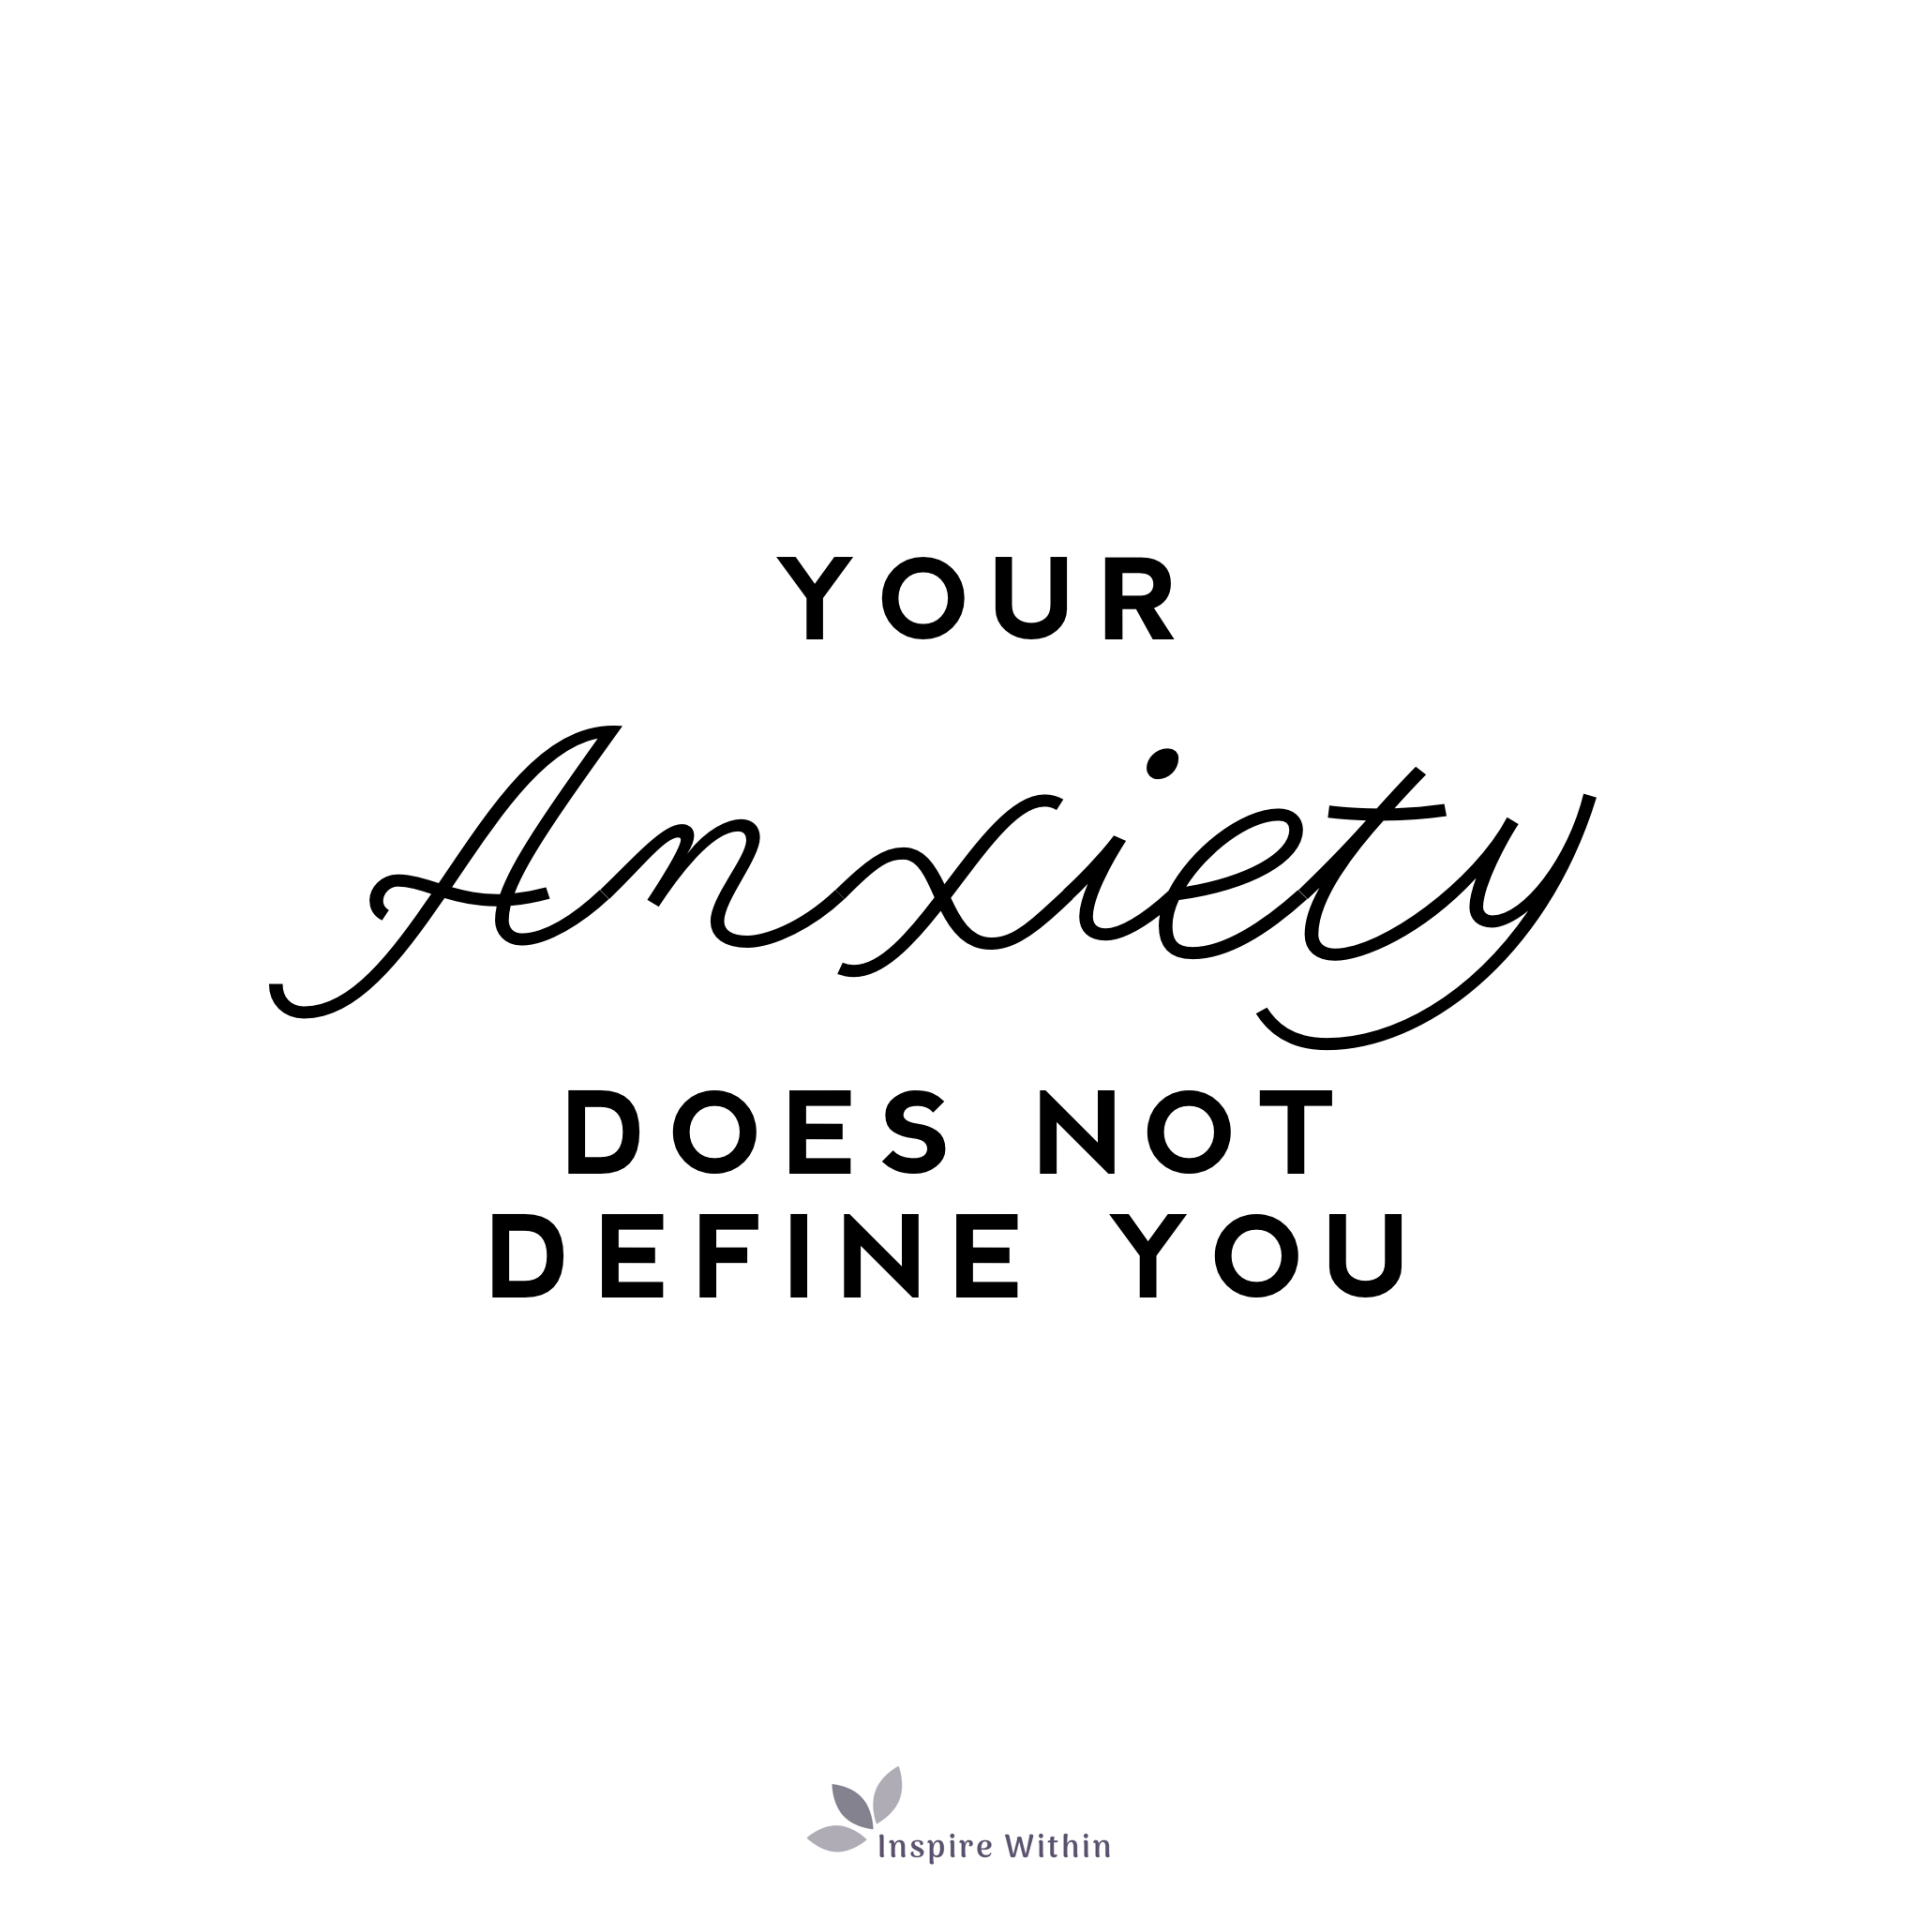 Your Anxiety does not define you